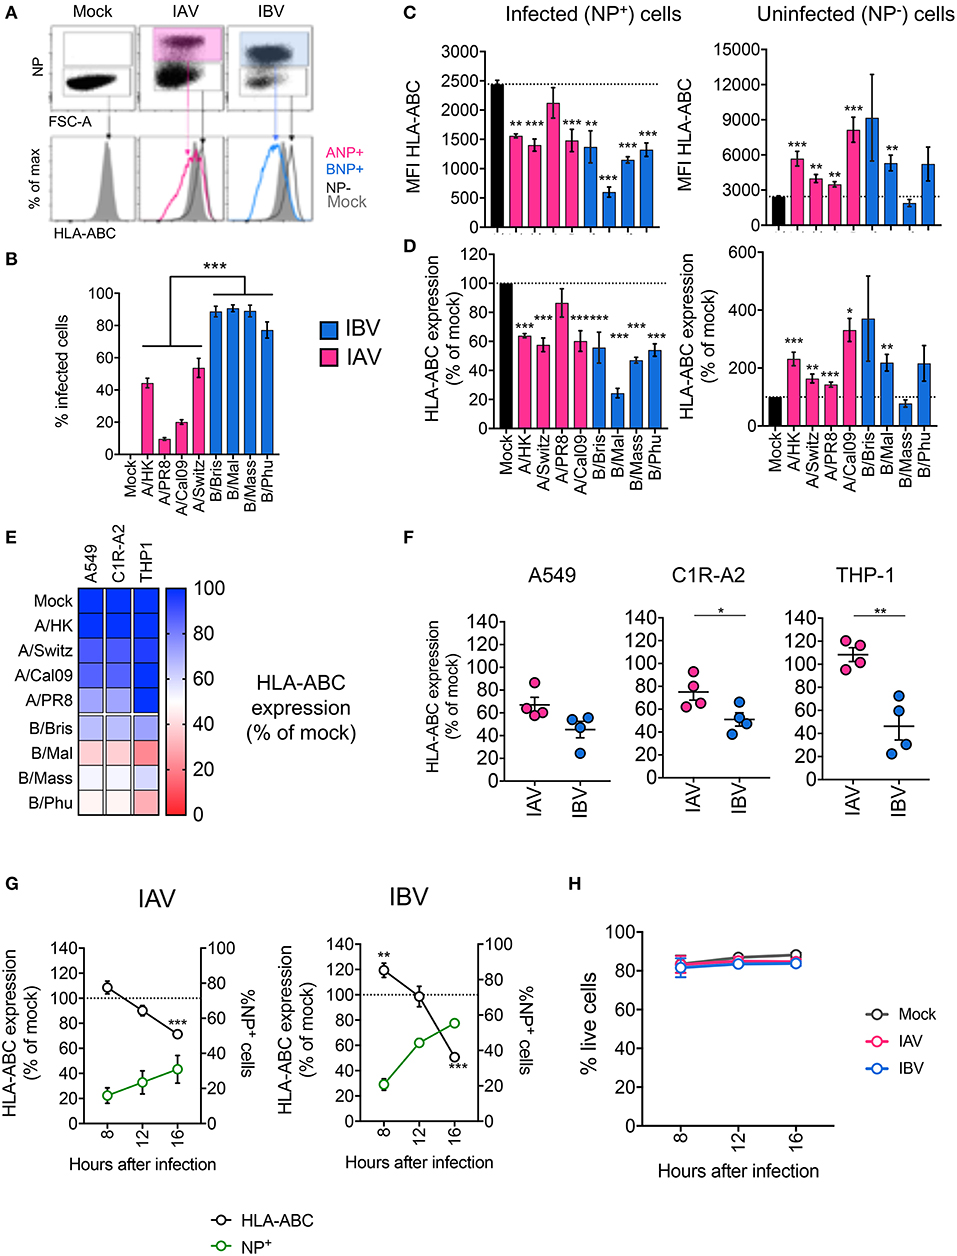 Frontiers | Downregulation of MHC Class Expression by Influenza A and B | Immunology